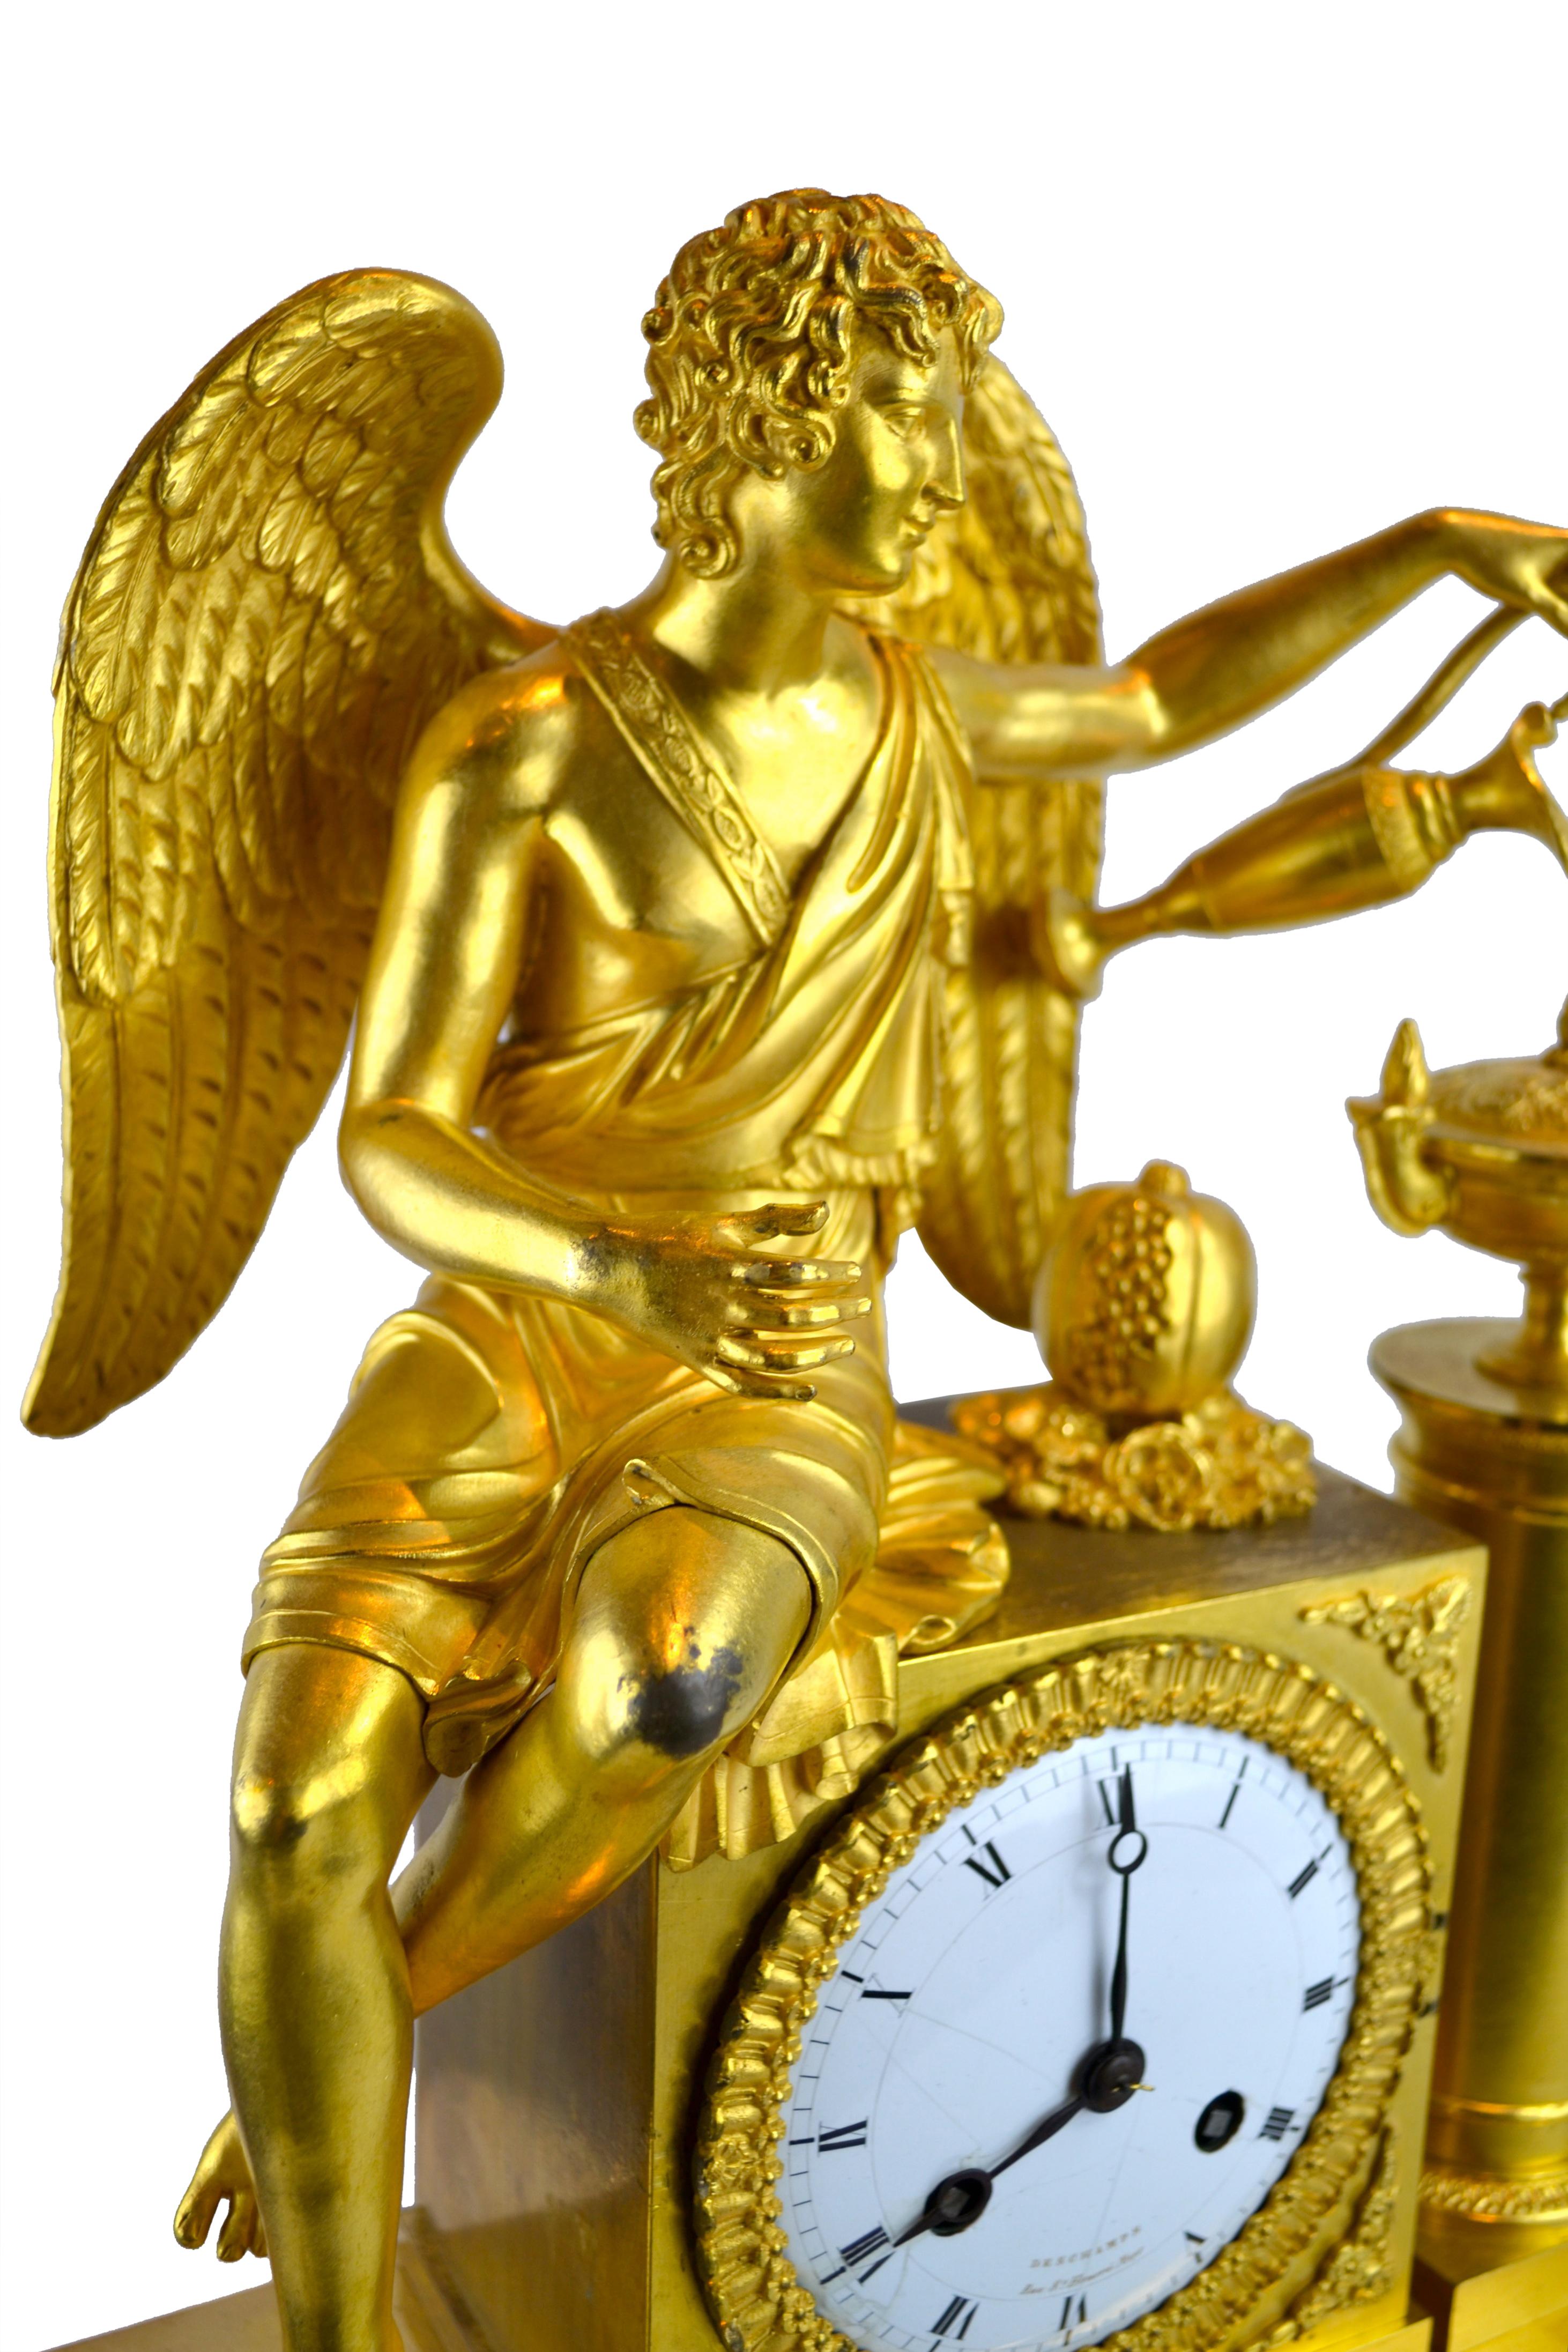 A figural French Empire clock in gilded bronze representing an allegory on how love nourishes life or “L’Amour alimentant la vie” in French. The clock shows a seated winged Amor refilling a lamp with oil, the symbol of life. The pomegranate placed